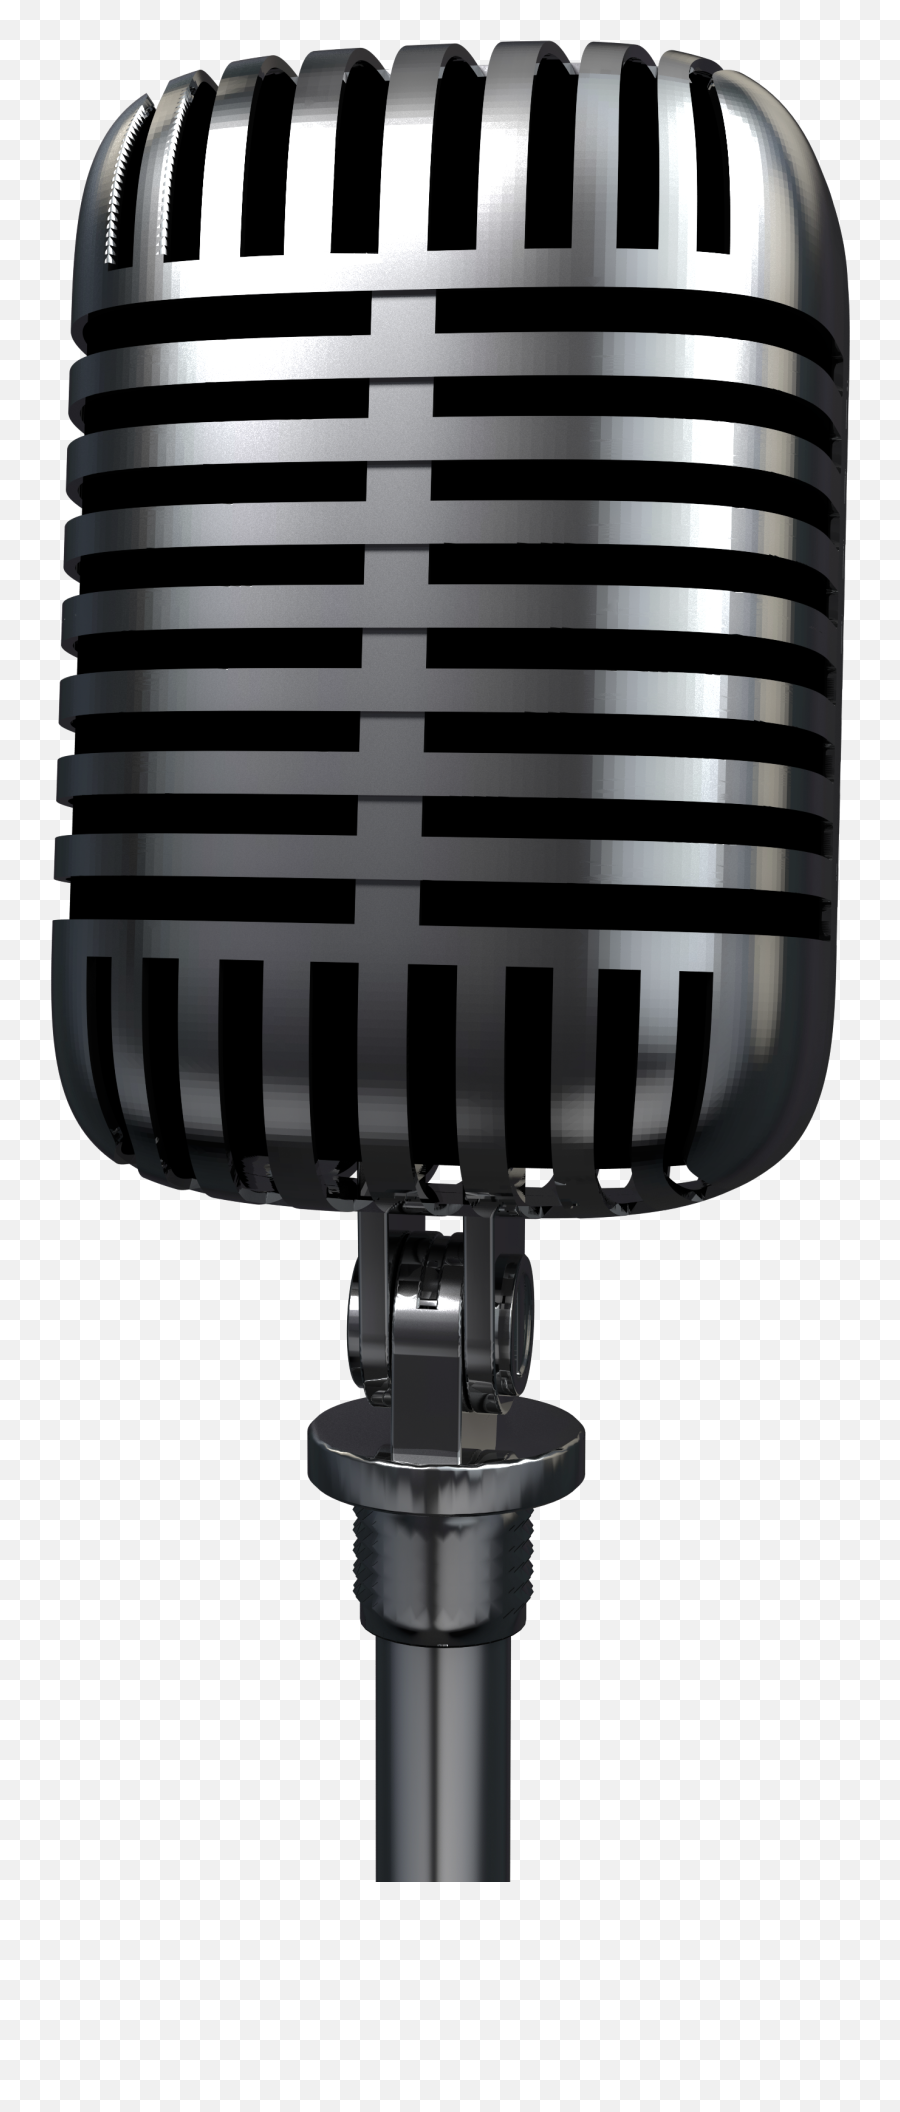 Radio Microphone Png Clipart - Full Size Clipart 3416250 Portable Emoji,Microphone Png